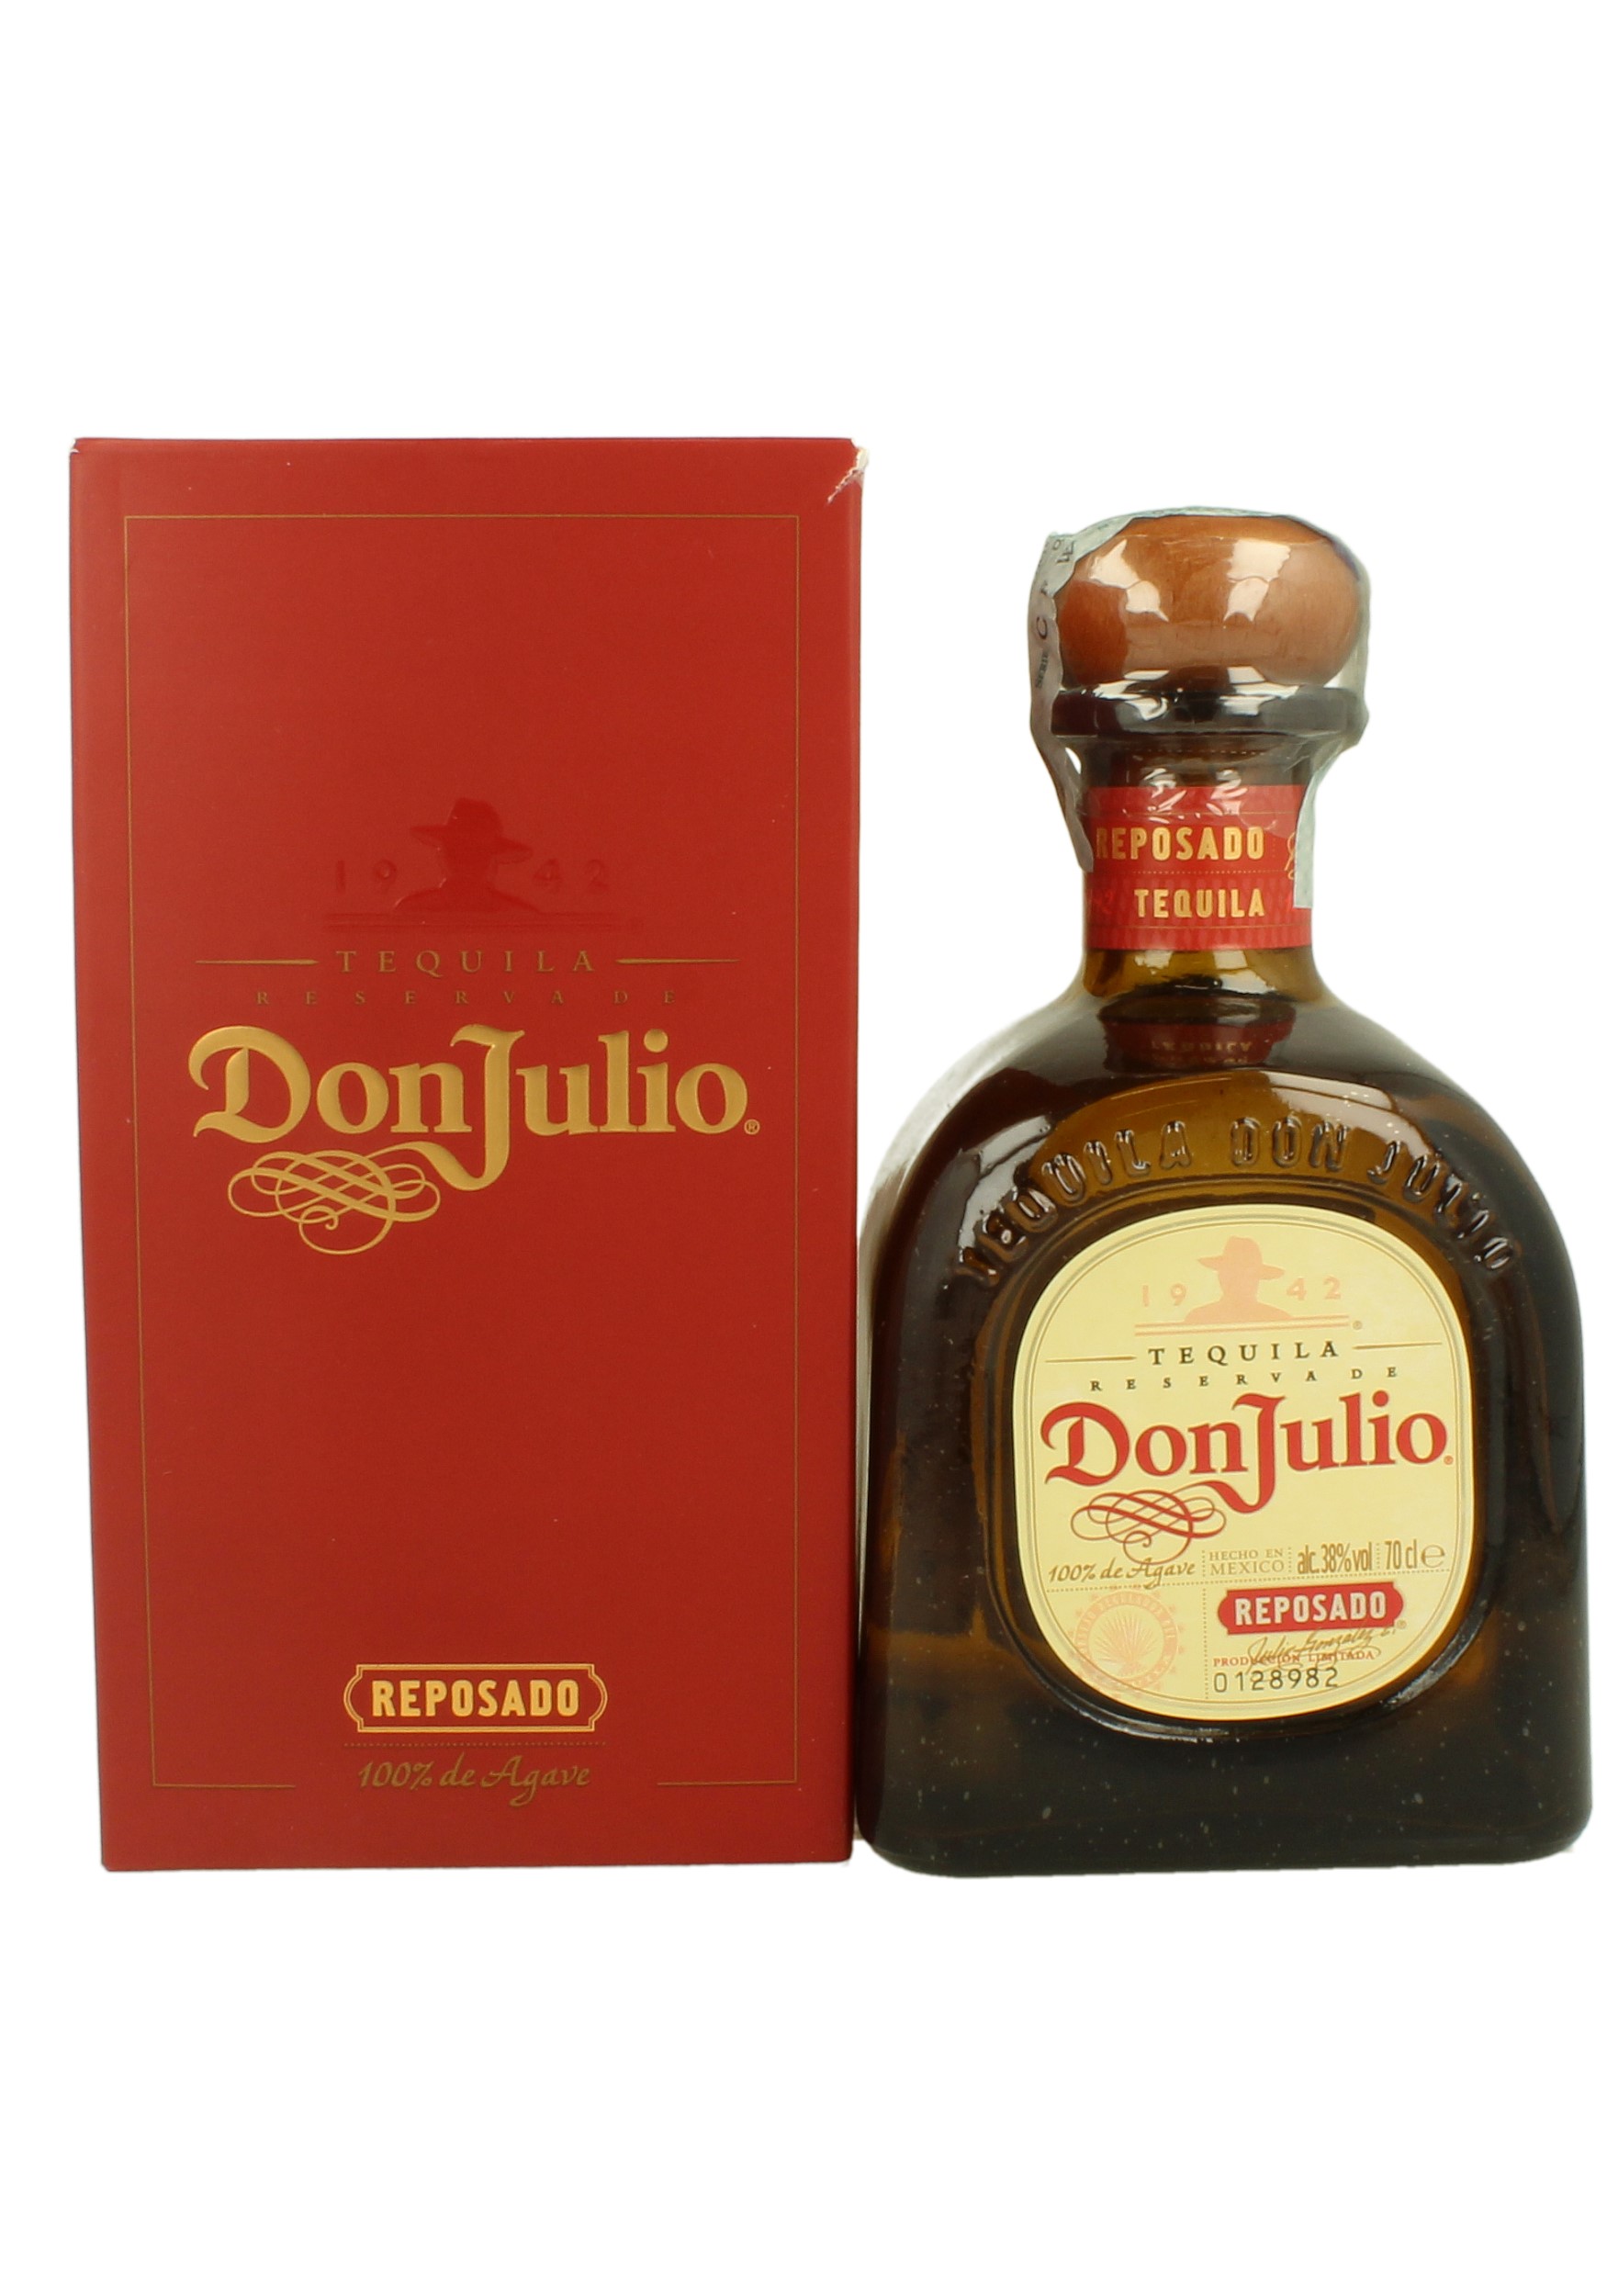 DON JULIO REPOSADO 70cl 38% - tequila - Products - Whisky Antique ...